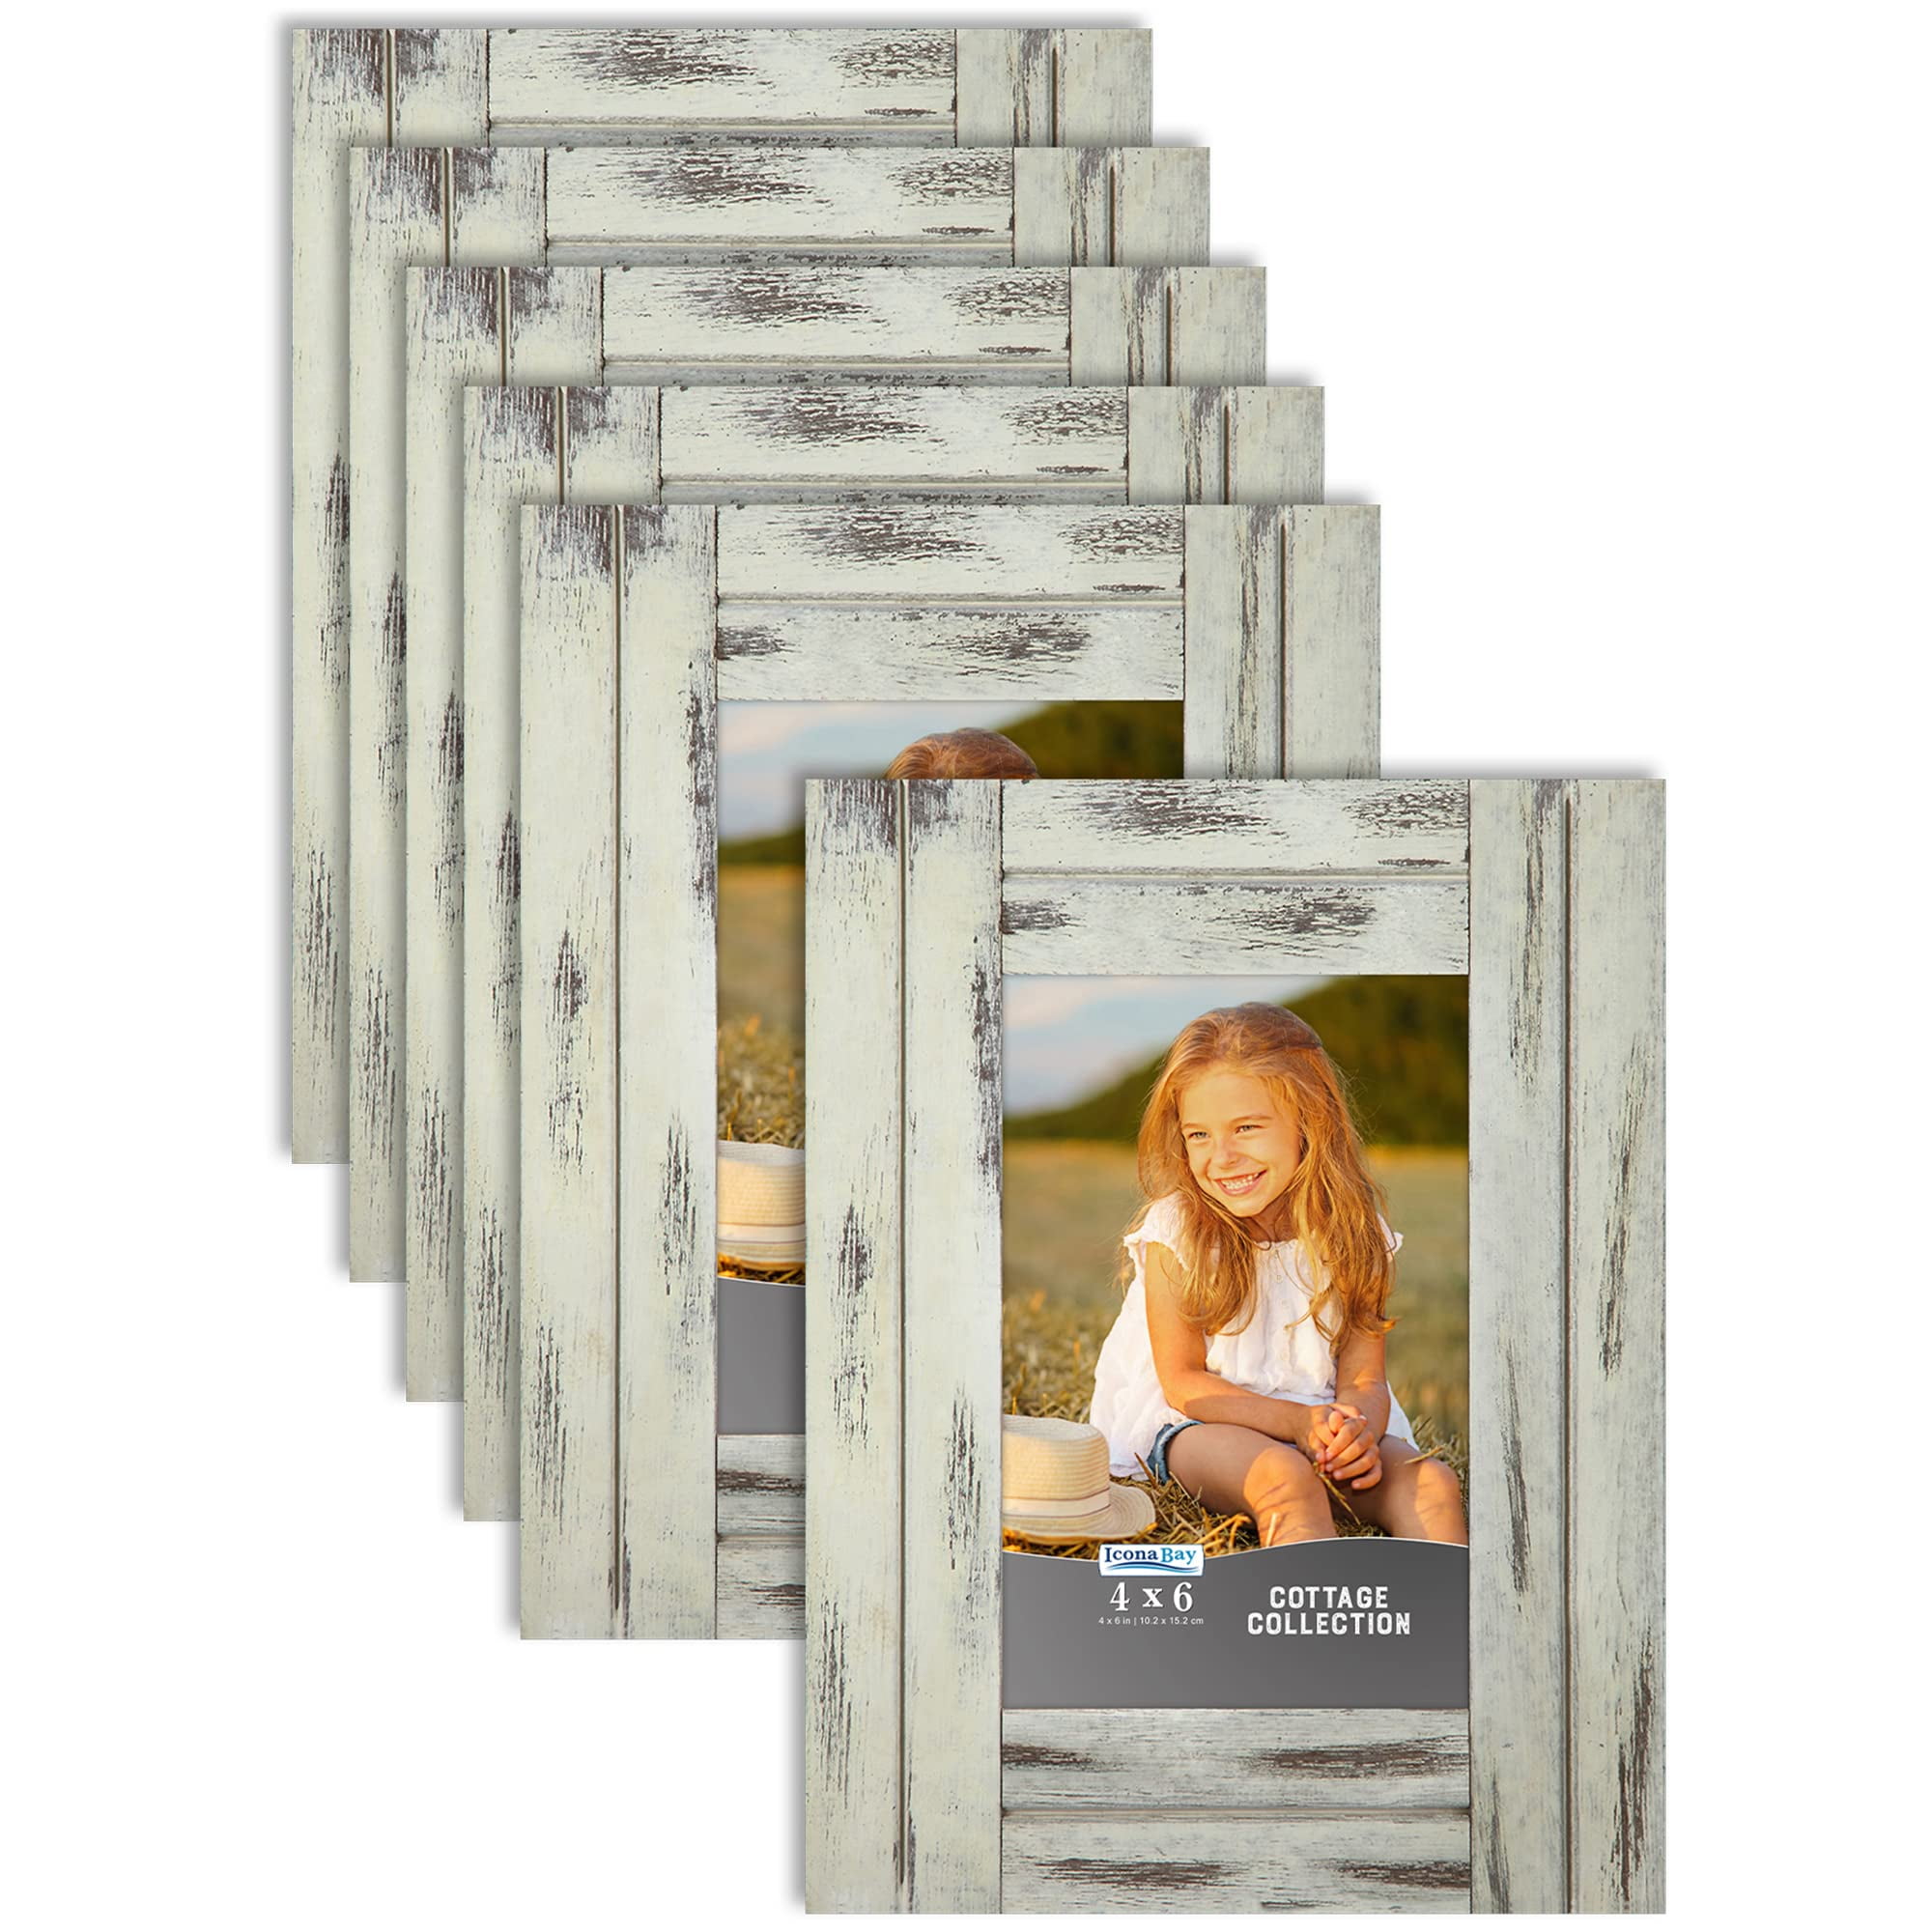 Icona Bay 4x6 Picture Frames (Black, 6 Pack), Sturdy Wood Composite Photo  Frames 4 x 6, Sleek Design, Table Top or Wall Mount, Exclusives Collection